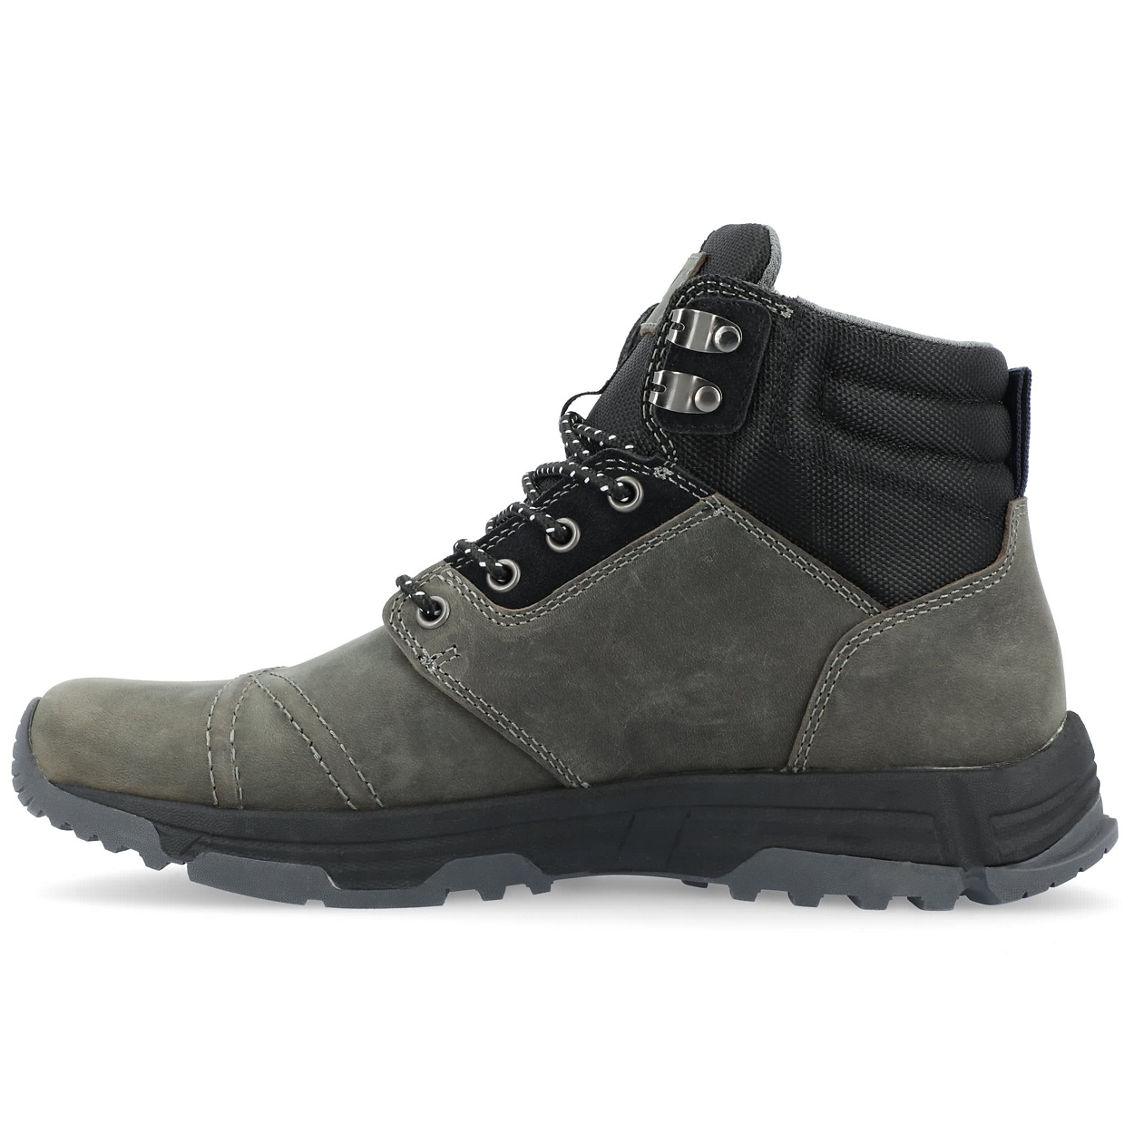 Territory Everglades Water Resistant Lace-Up Boot - Image 2 of 5